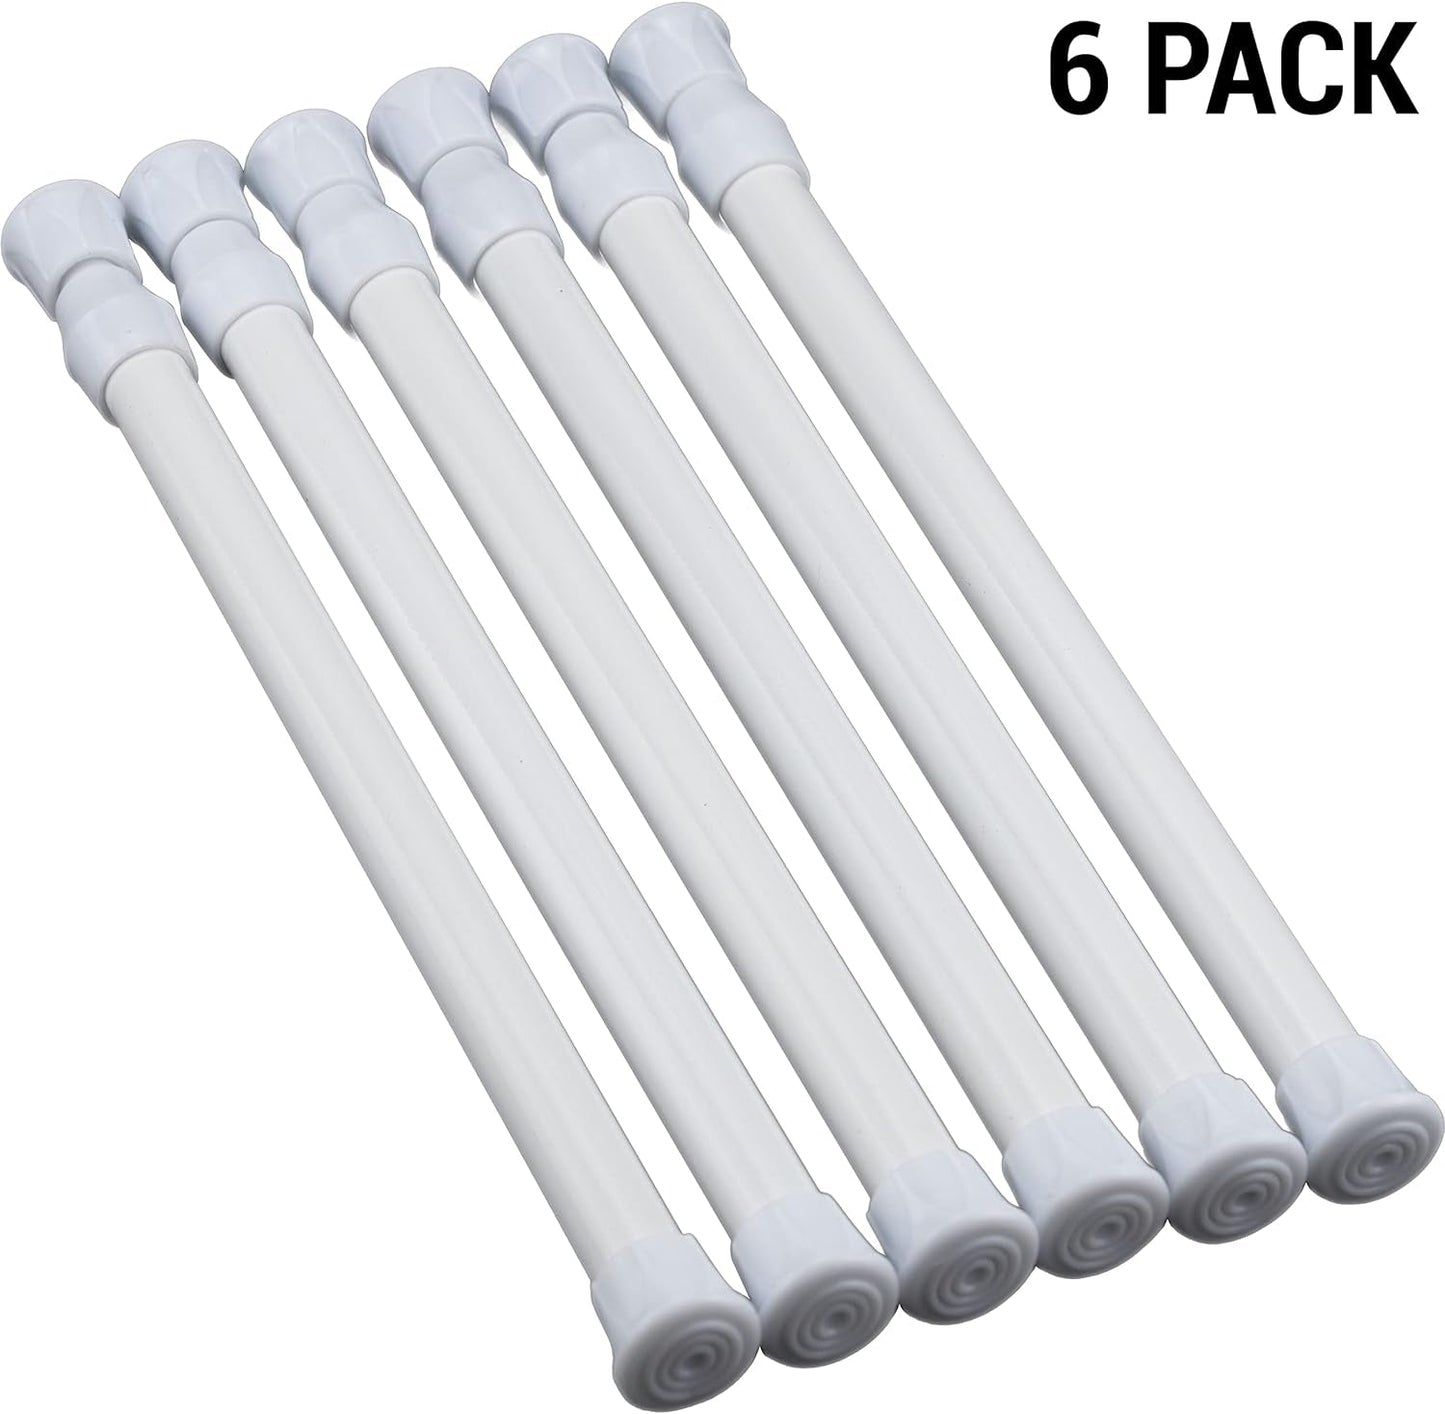 6 Pack Cupboard Bars Tension Rod Spring Extendable Curtain Rods White Adjustable Tensions Rods for Shower Closet Bathroom Kitchen Cupboard Wardrobe Bookshelf DIY Projects (9.8 to 15.7 Inches)